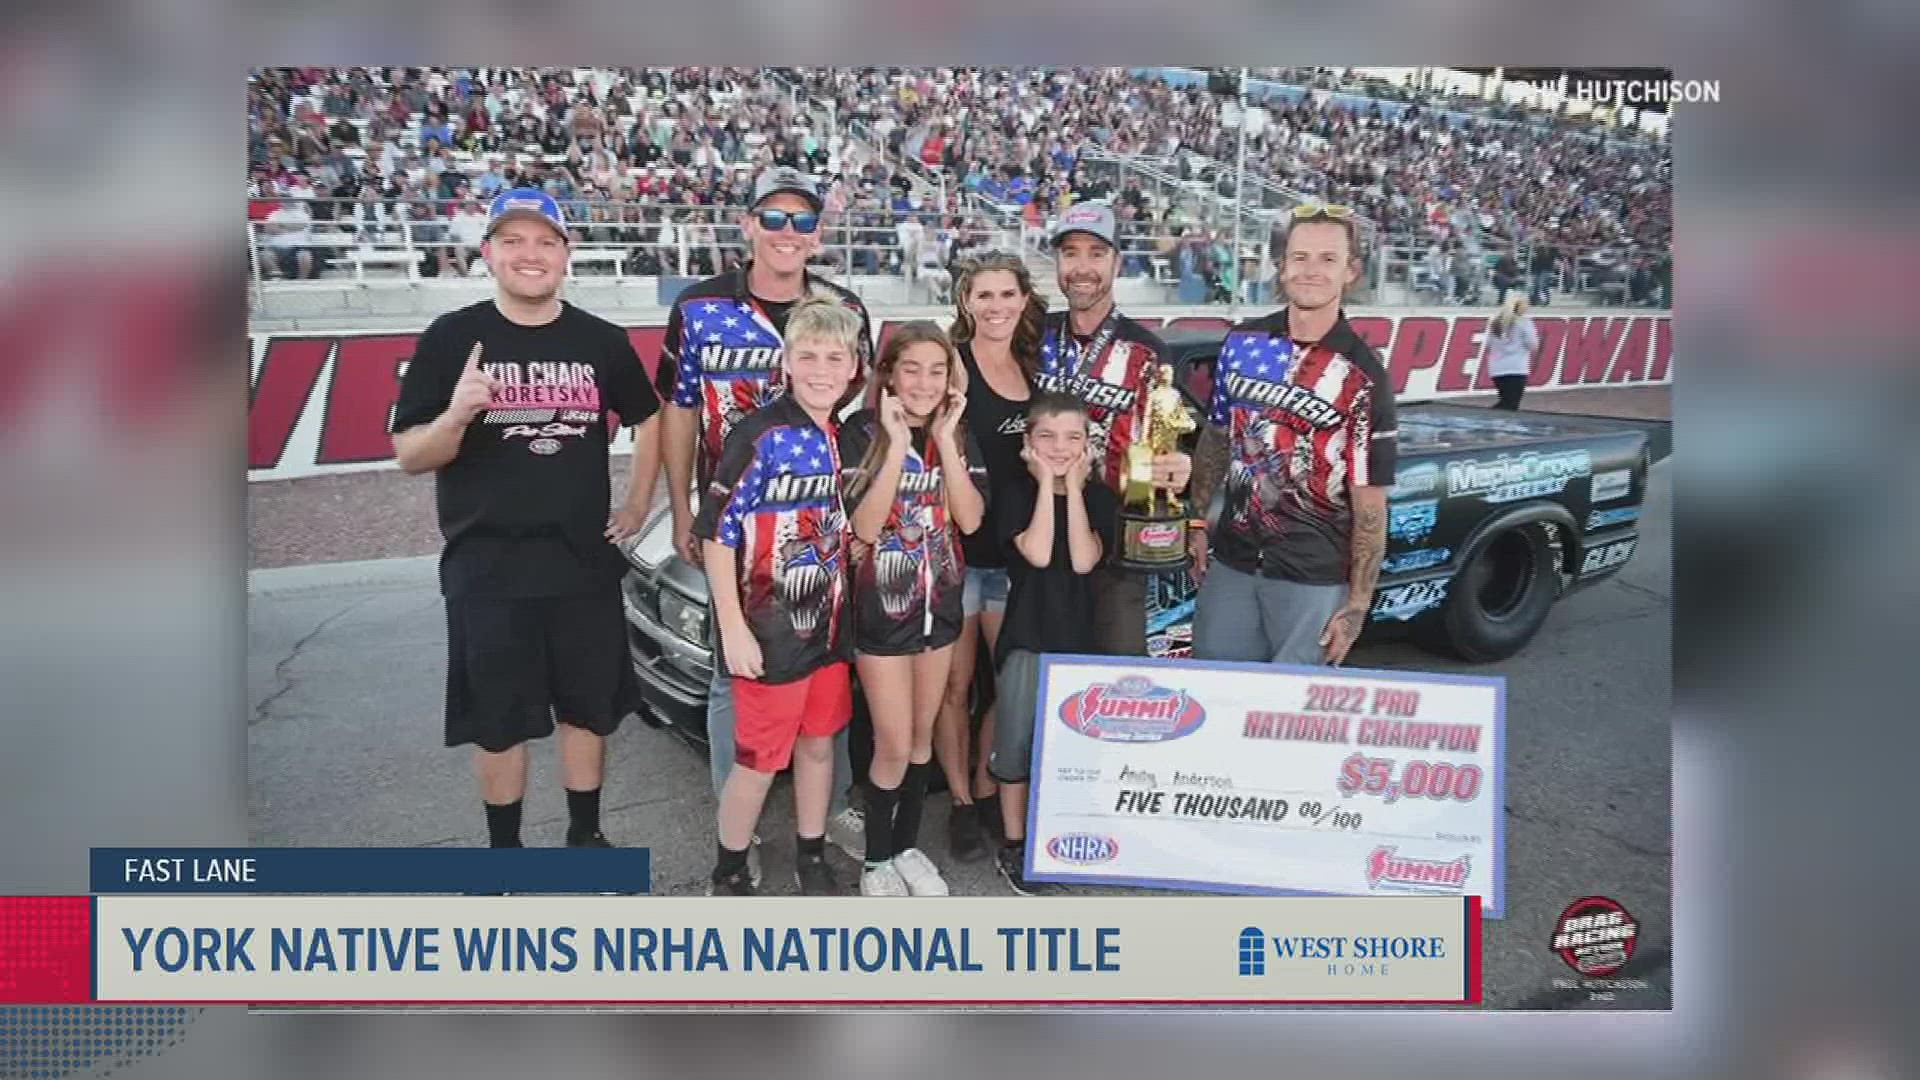 Andy Anderson wins first NHRA Pro Eliminator class title.